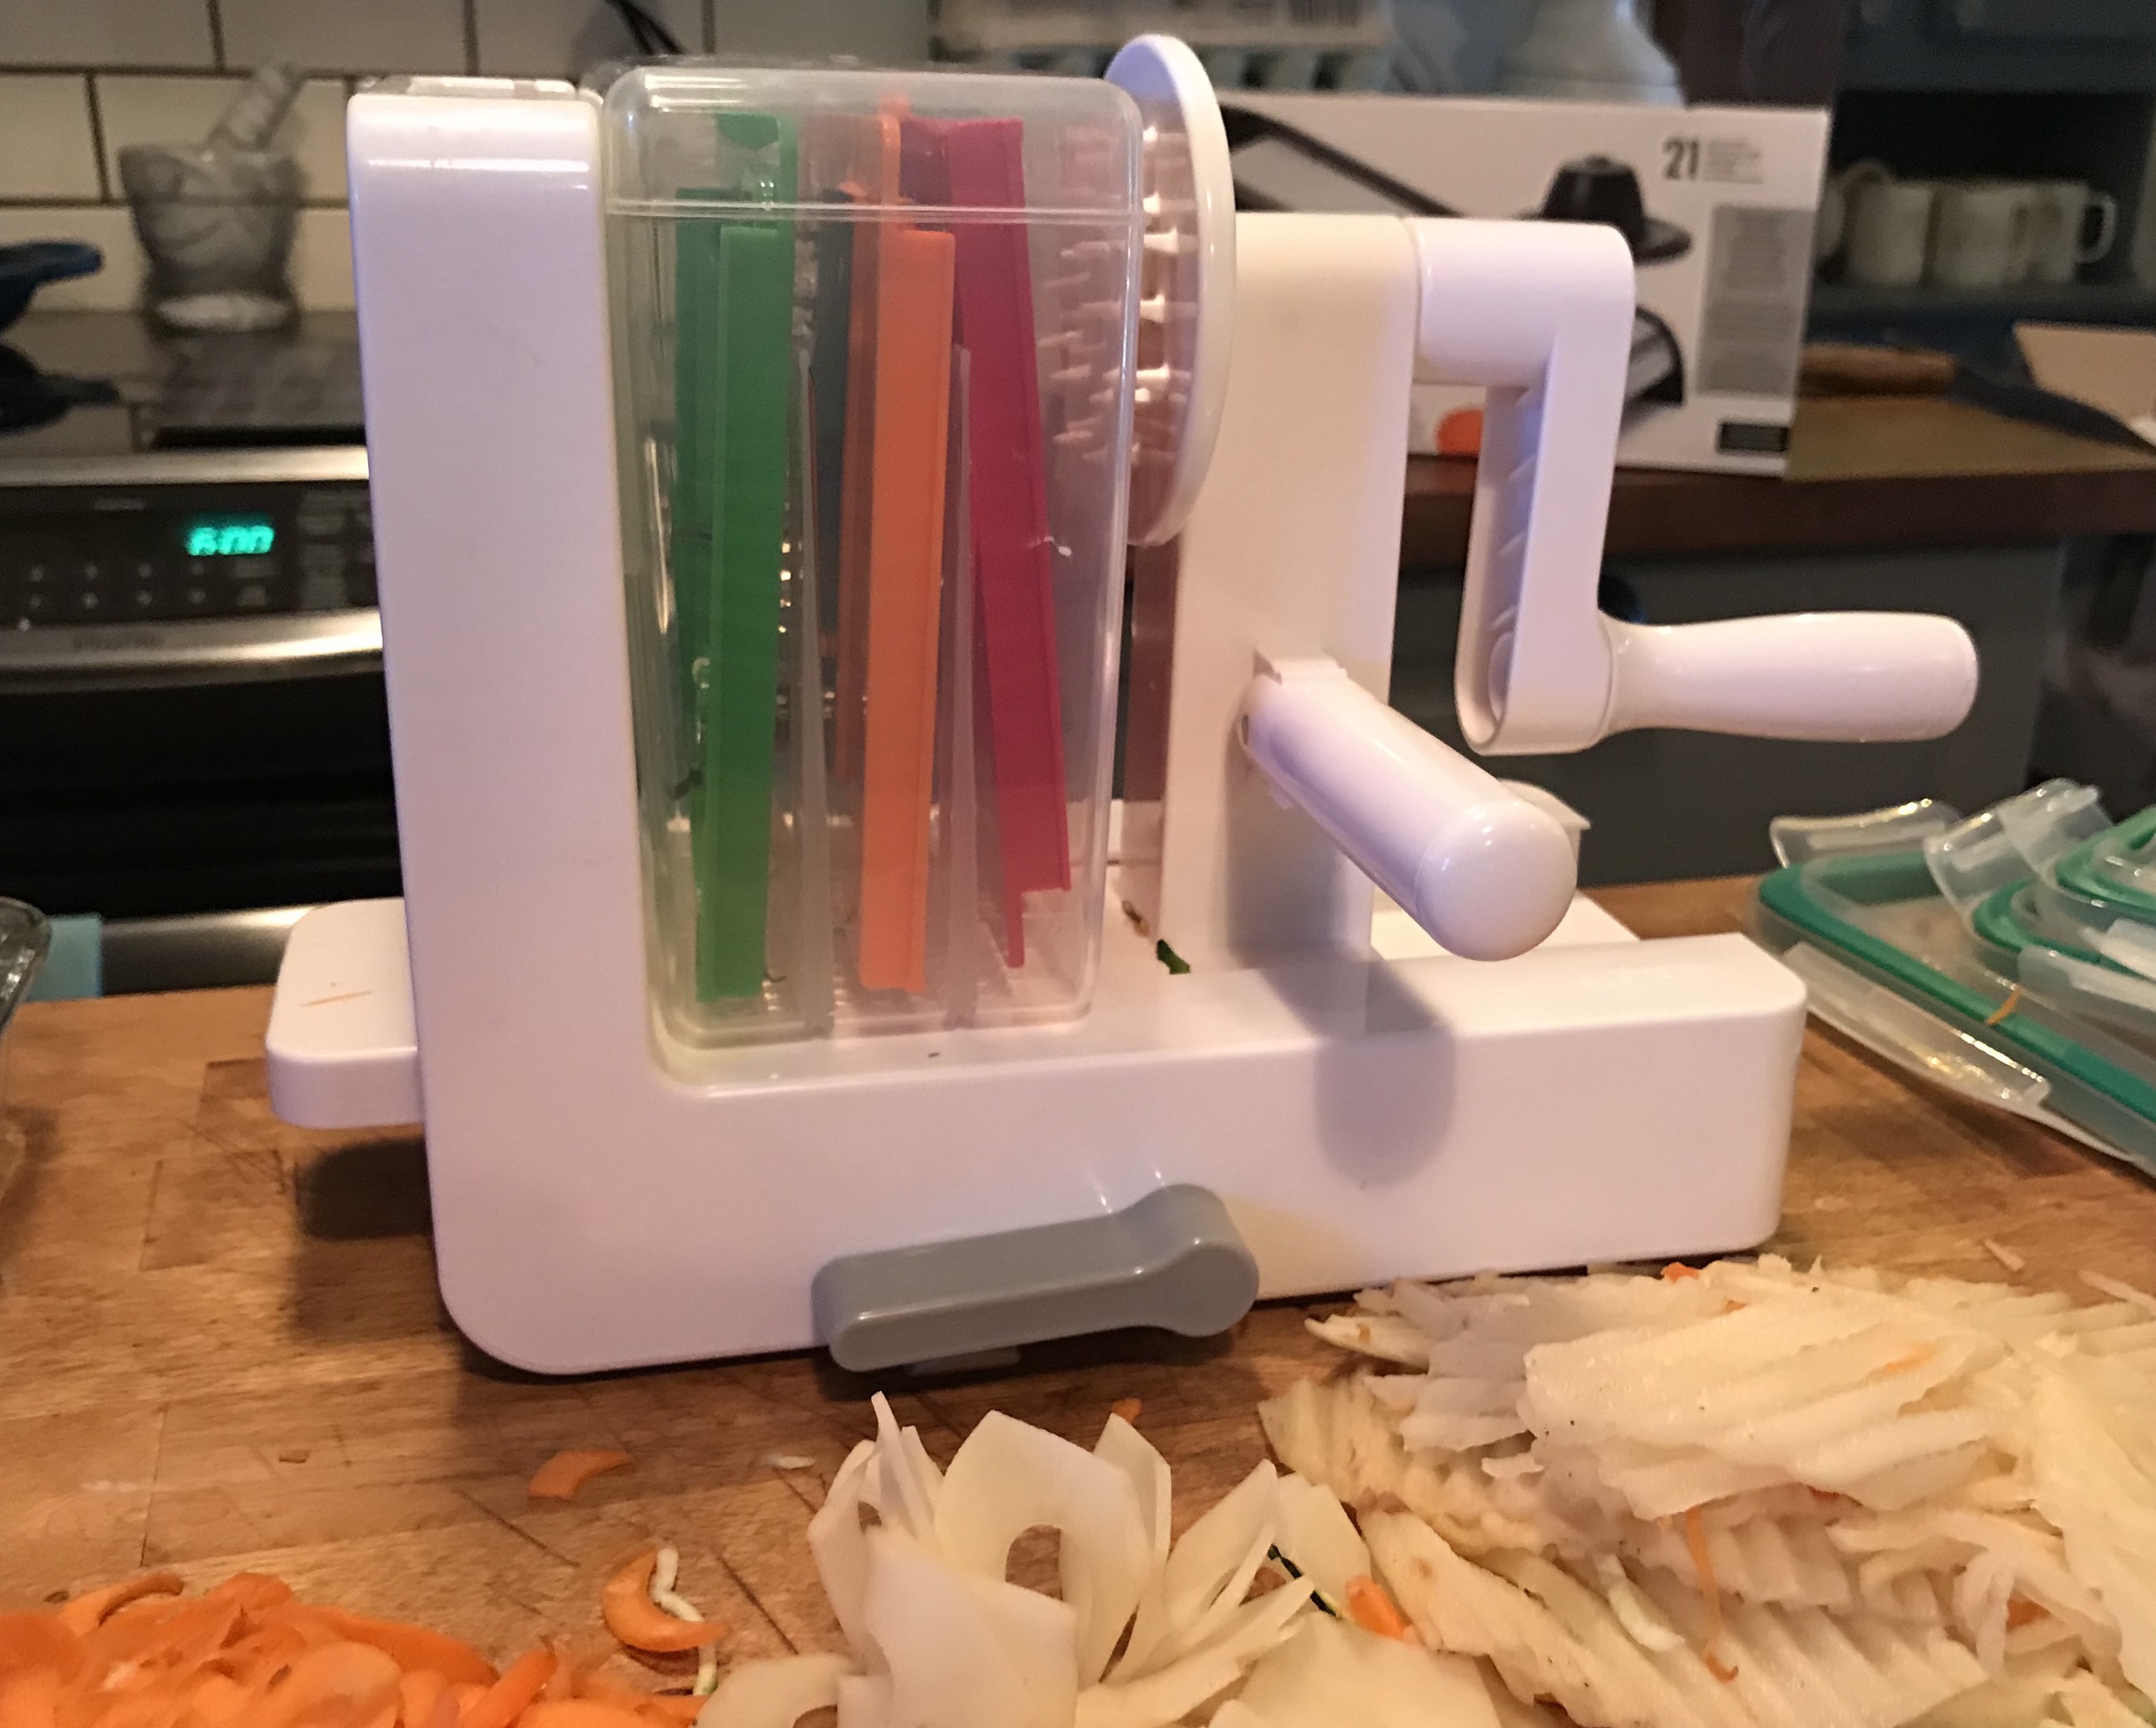 https://blog.bestbuy.ca/wp-content/uploads/2018/07/OXO-Spiralizer-container-for-blades.jpg